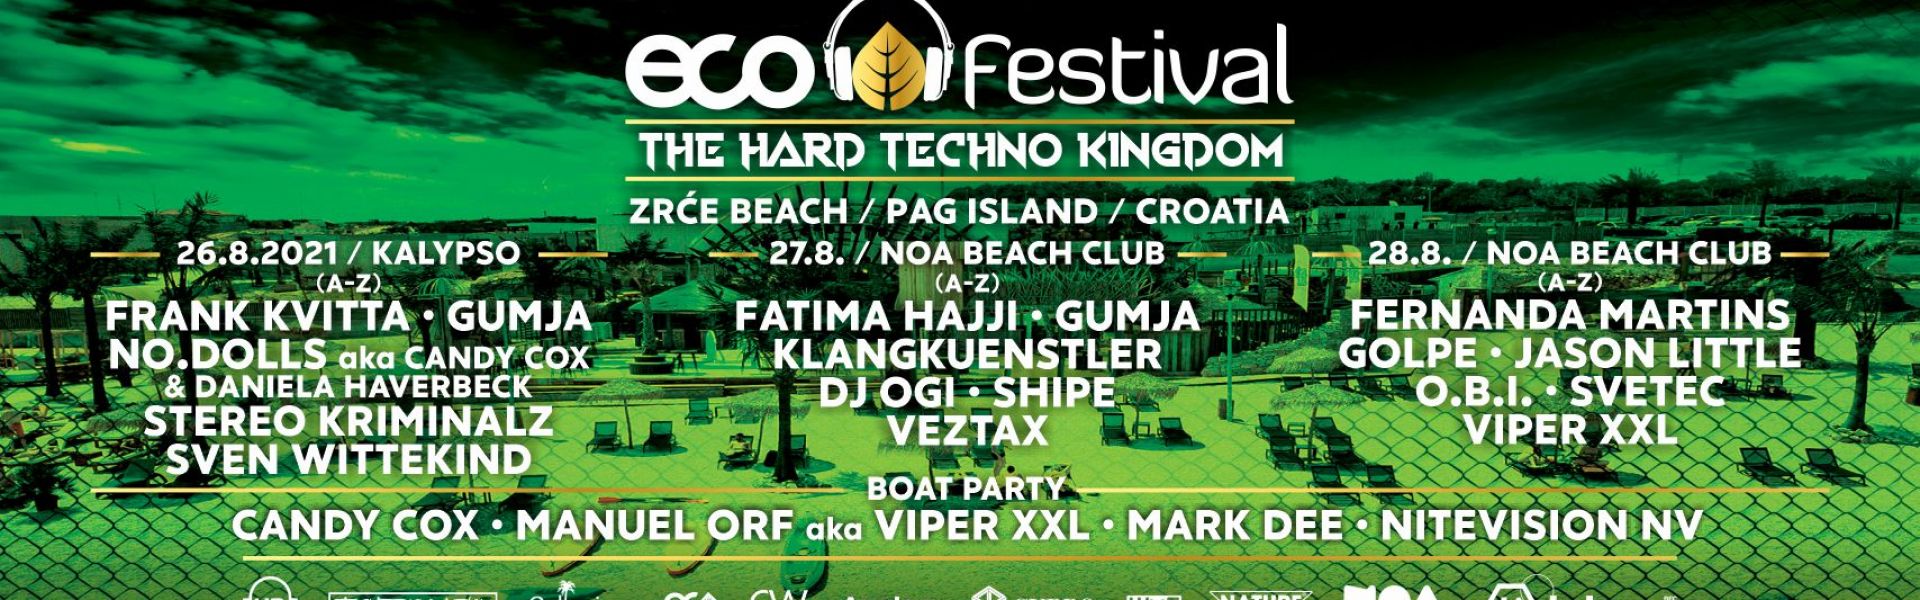 Eco festival - Boat party